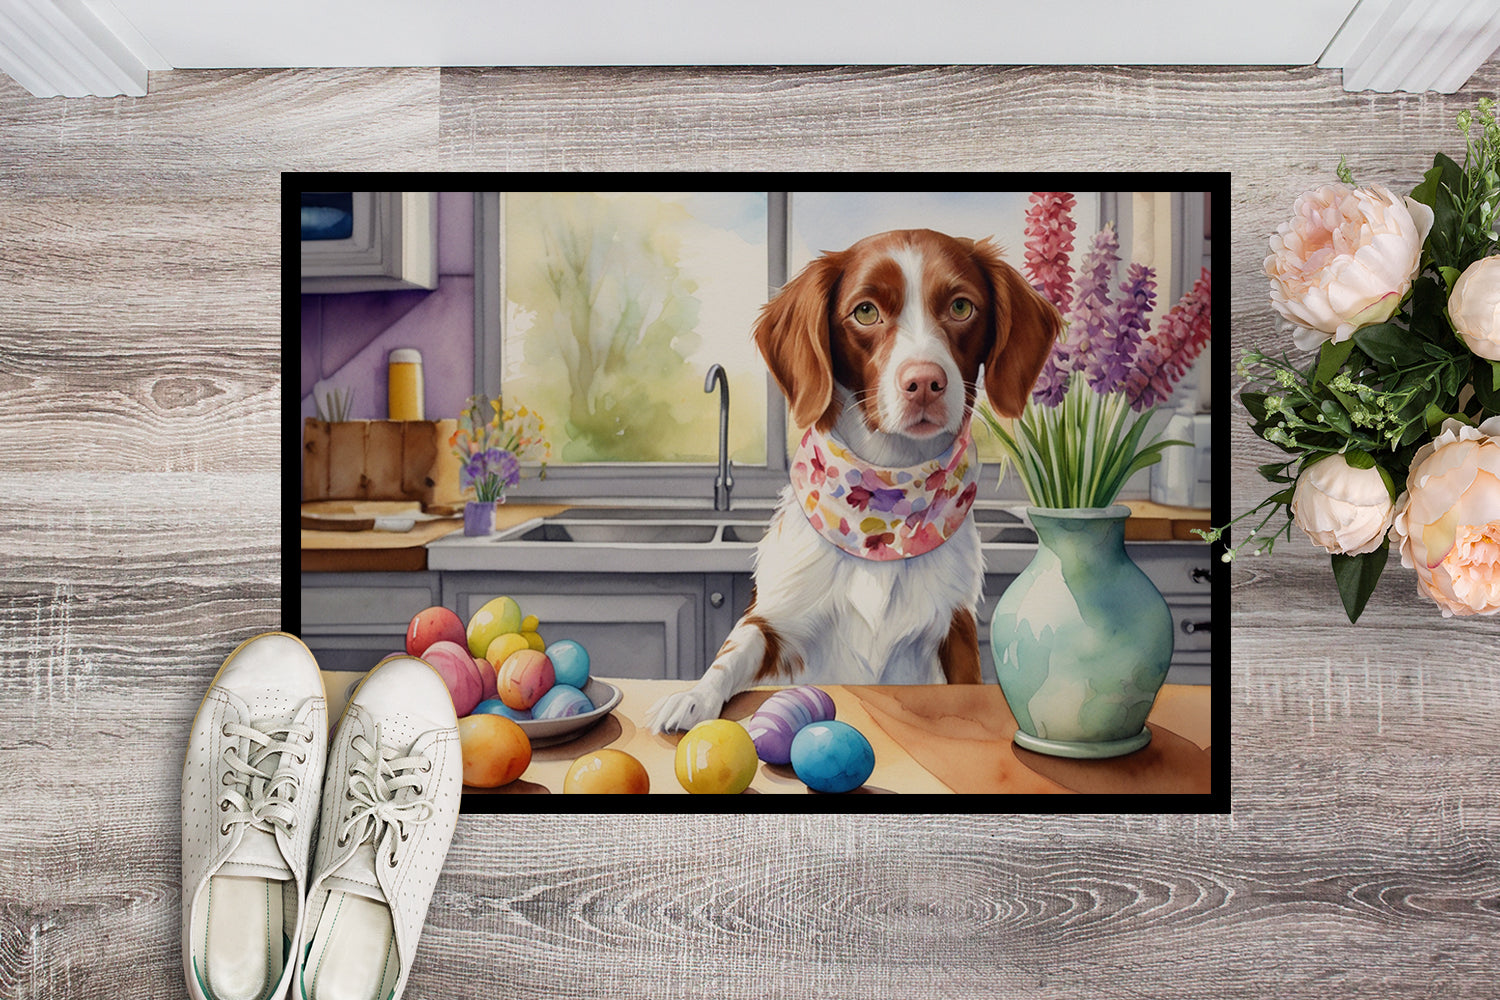 Buy this Decorating Easter Brittany Spaniel Doormat